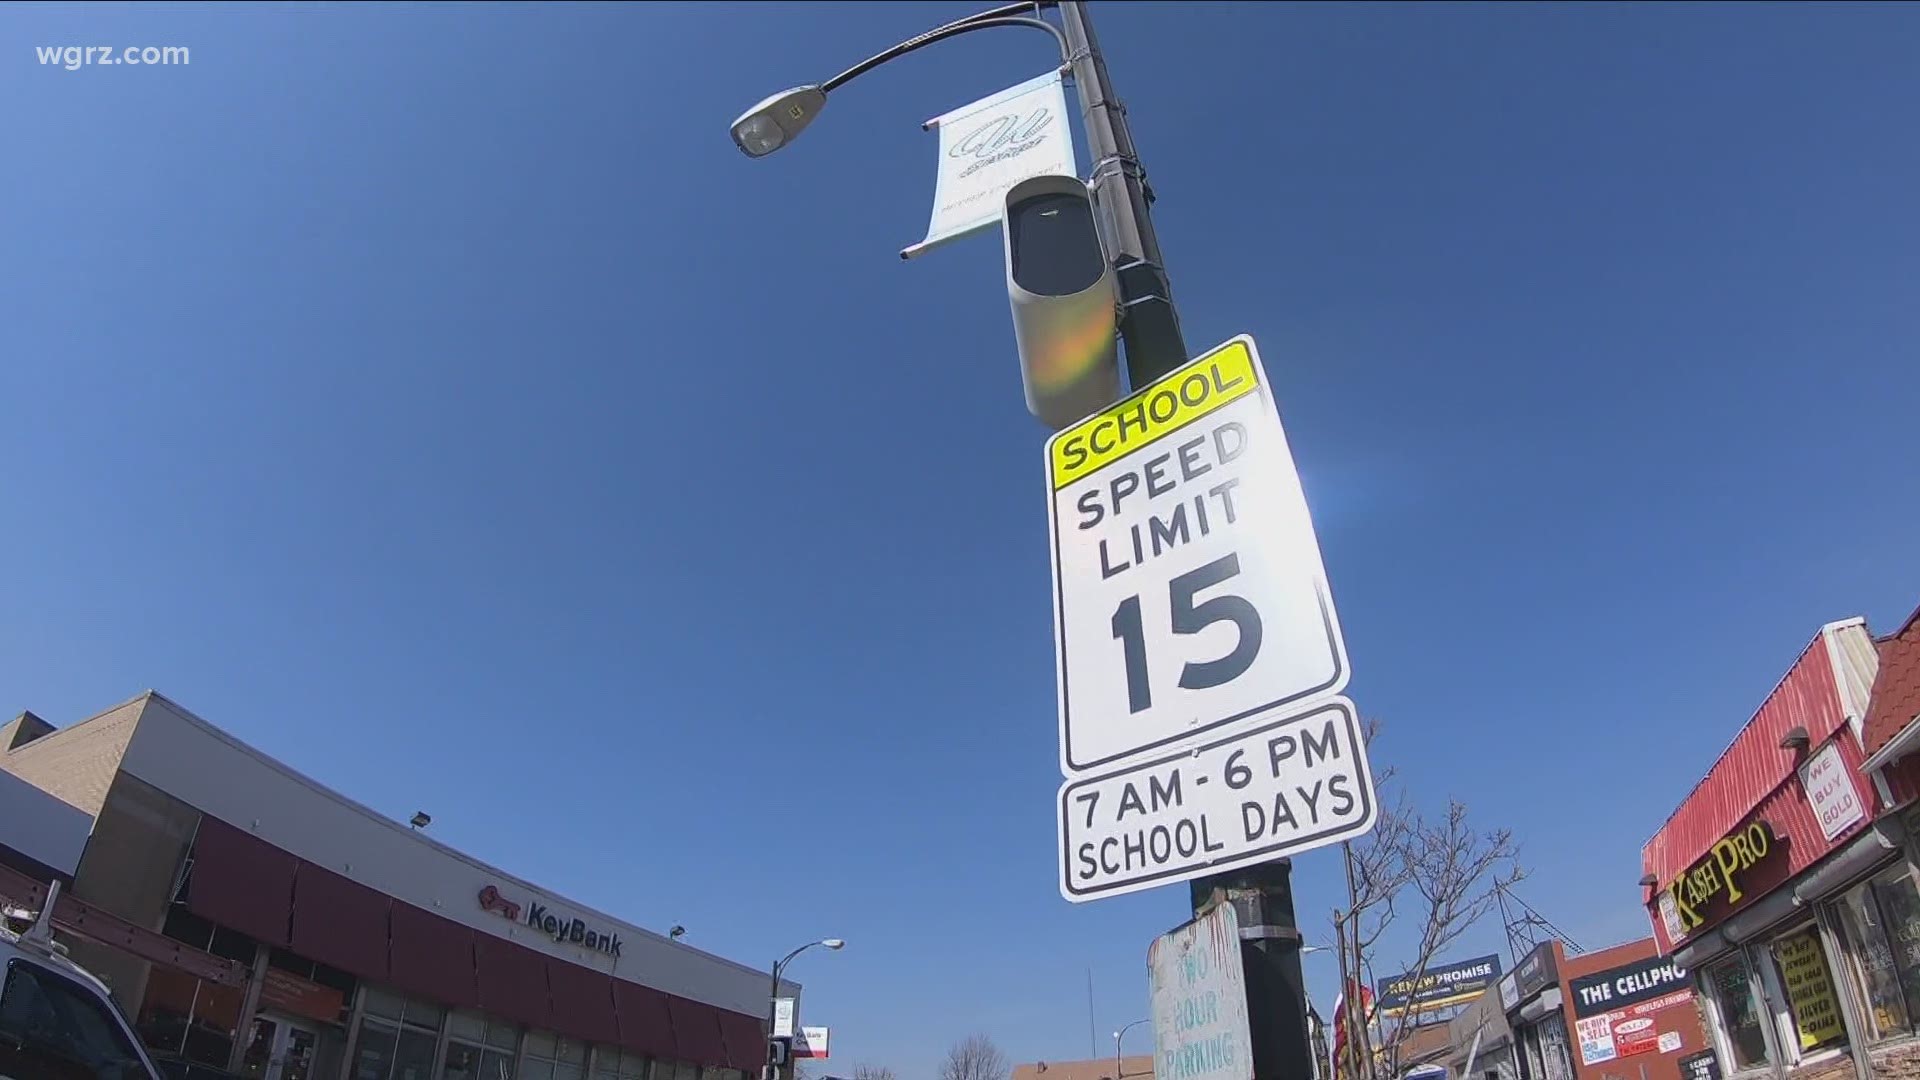 If you are going more than 10-miles per hour above in school zones, you will likely get a ticket once it's caught on camera. Lawmakers still have questions though.